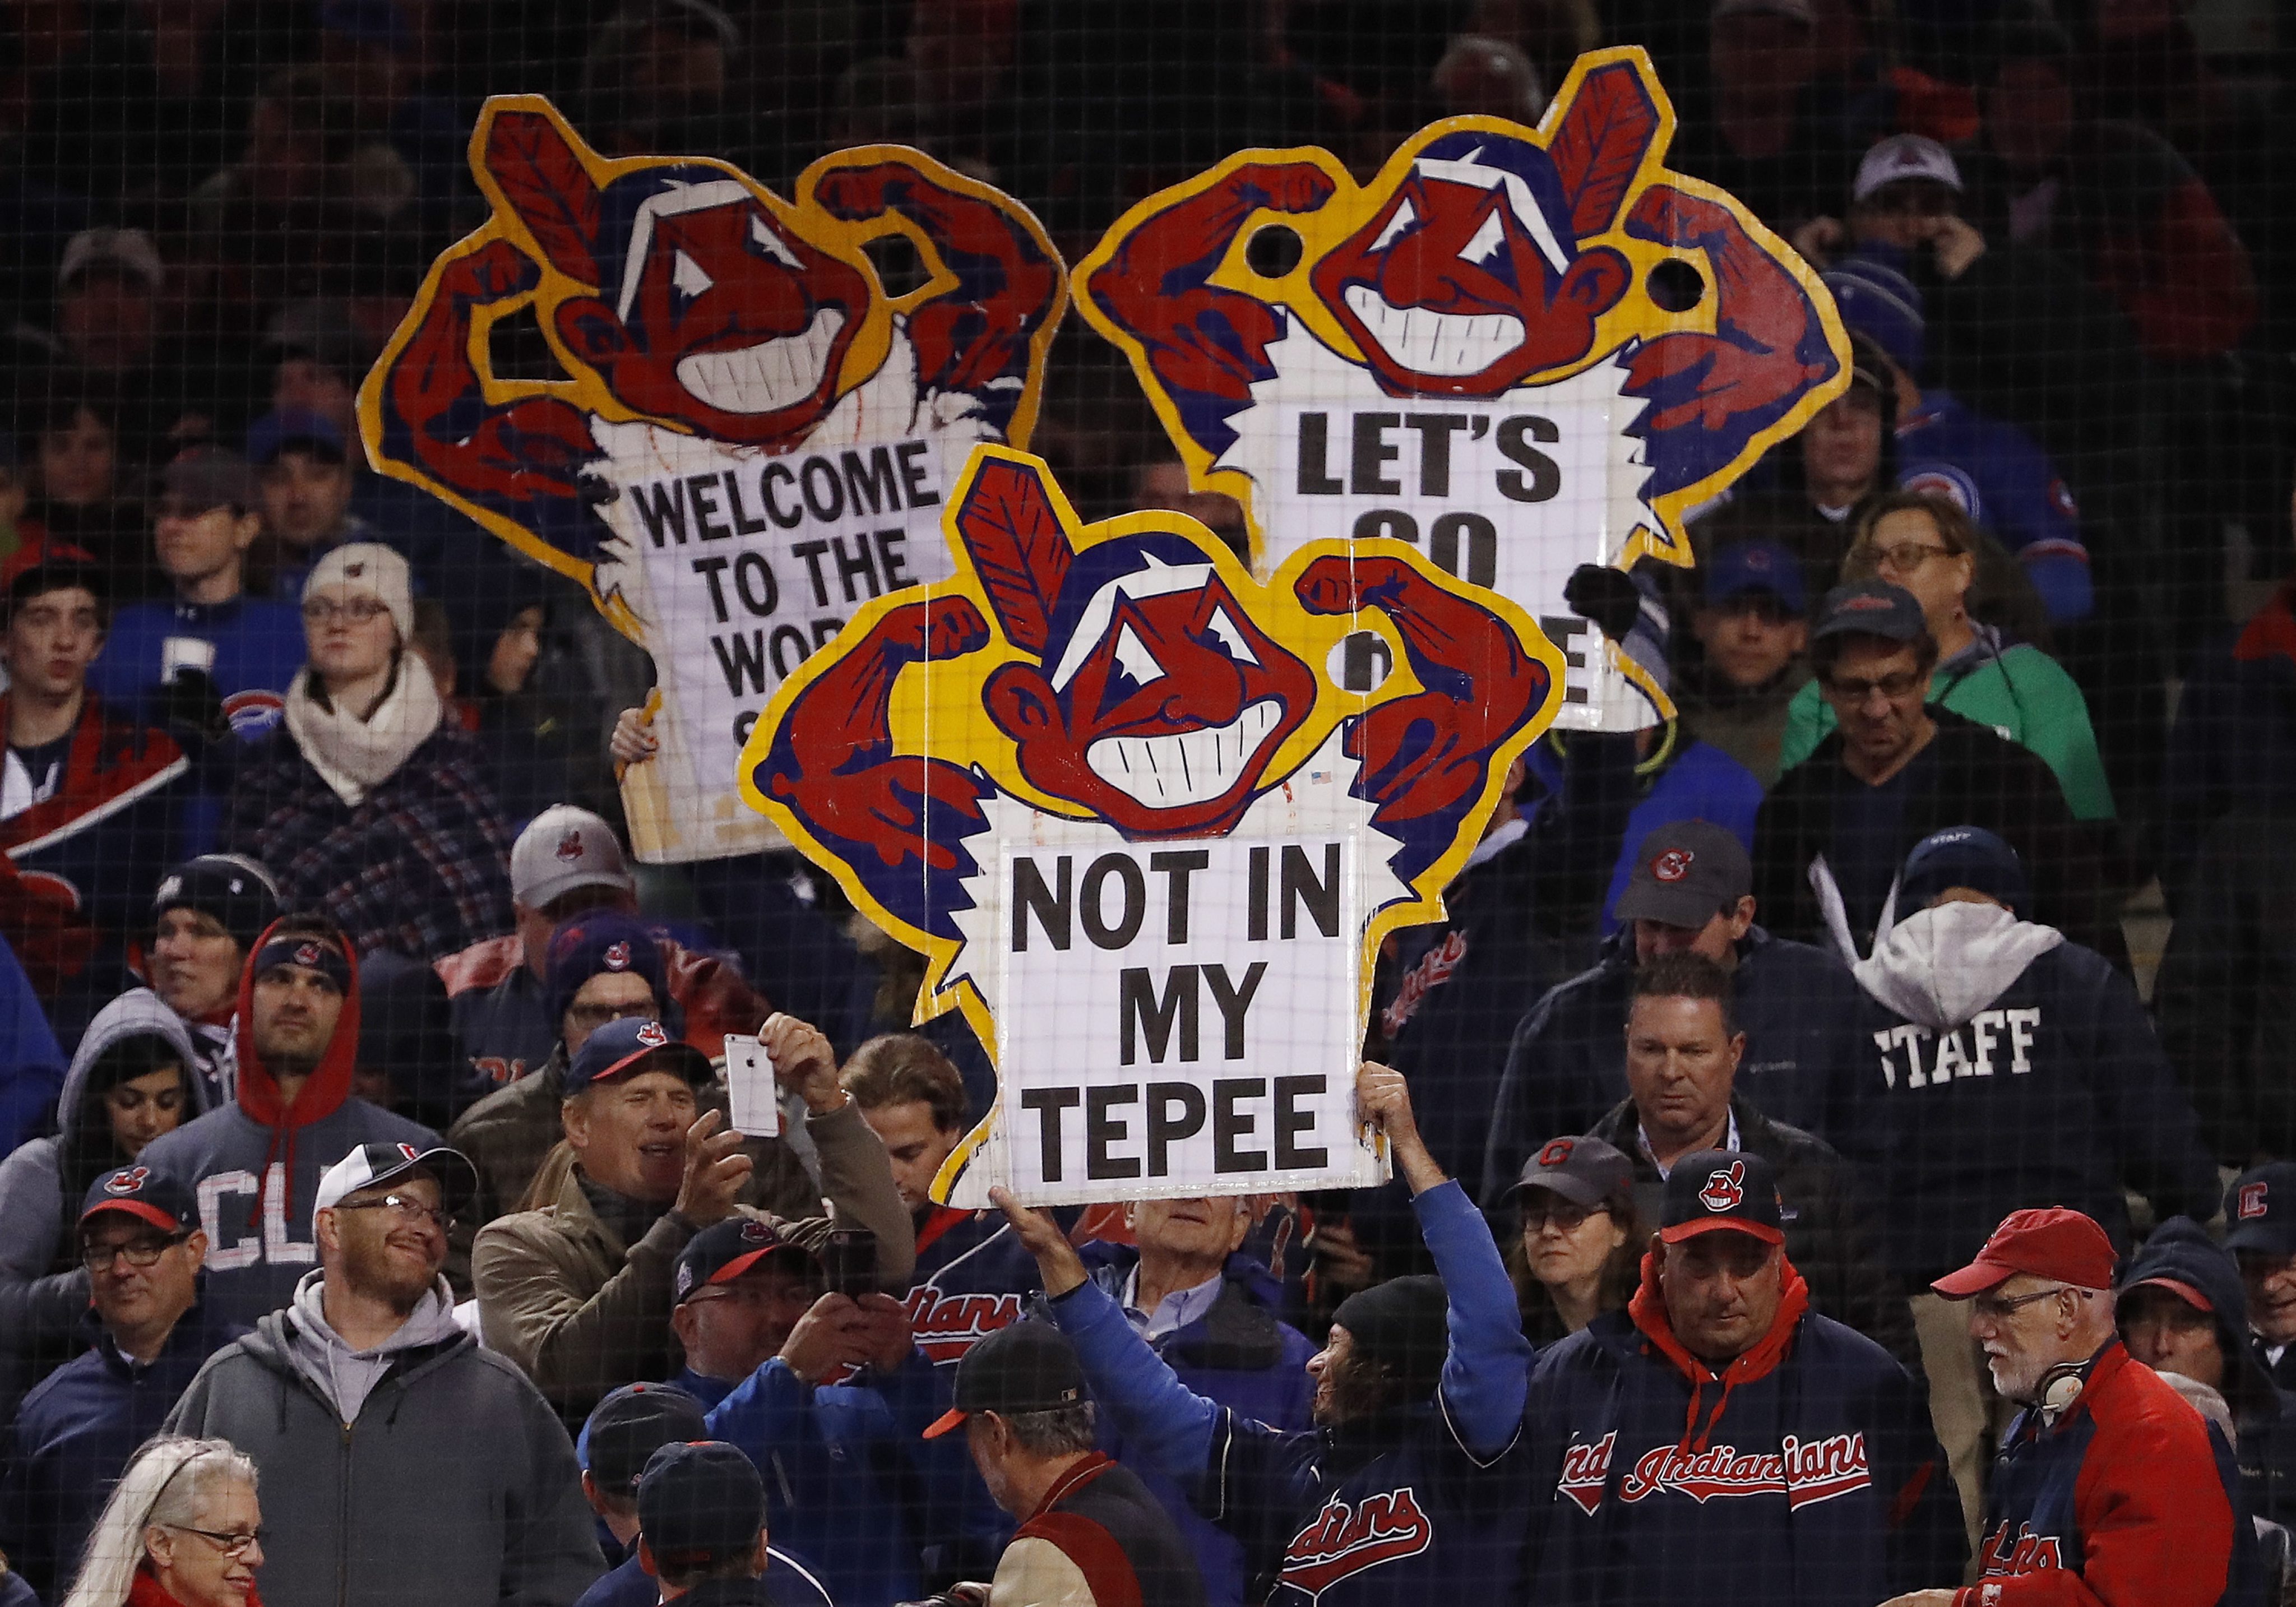 epa05603081 Cleveland Indians fans hold up signs in the top of the eighth inning of game one of the World Series between the Chicago Cubs and the Cleveland Indians at Progressive Field in Cleveland, Ohio, USA, 25 October 2016. The best-of-seven series will be played with games first in Cleveland, then Chicago and back to Cleveland if necessary. EPA/JOHN G. MABANGLO ORG XMIT: MCX019